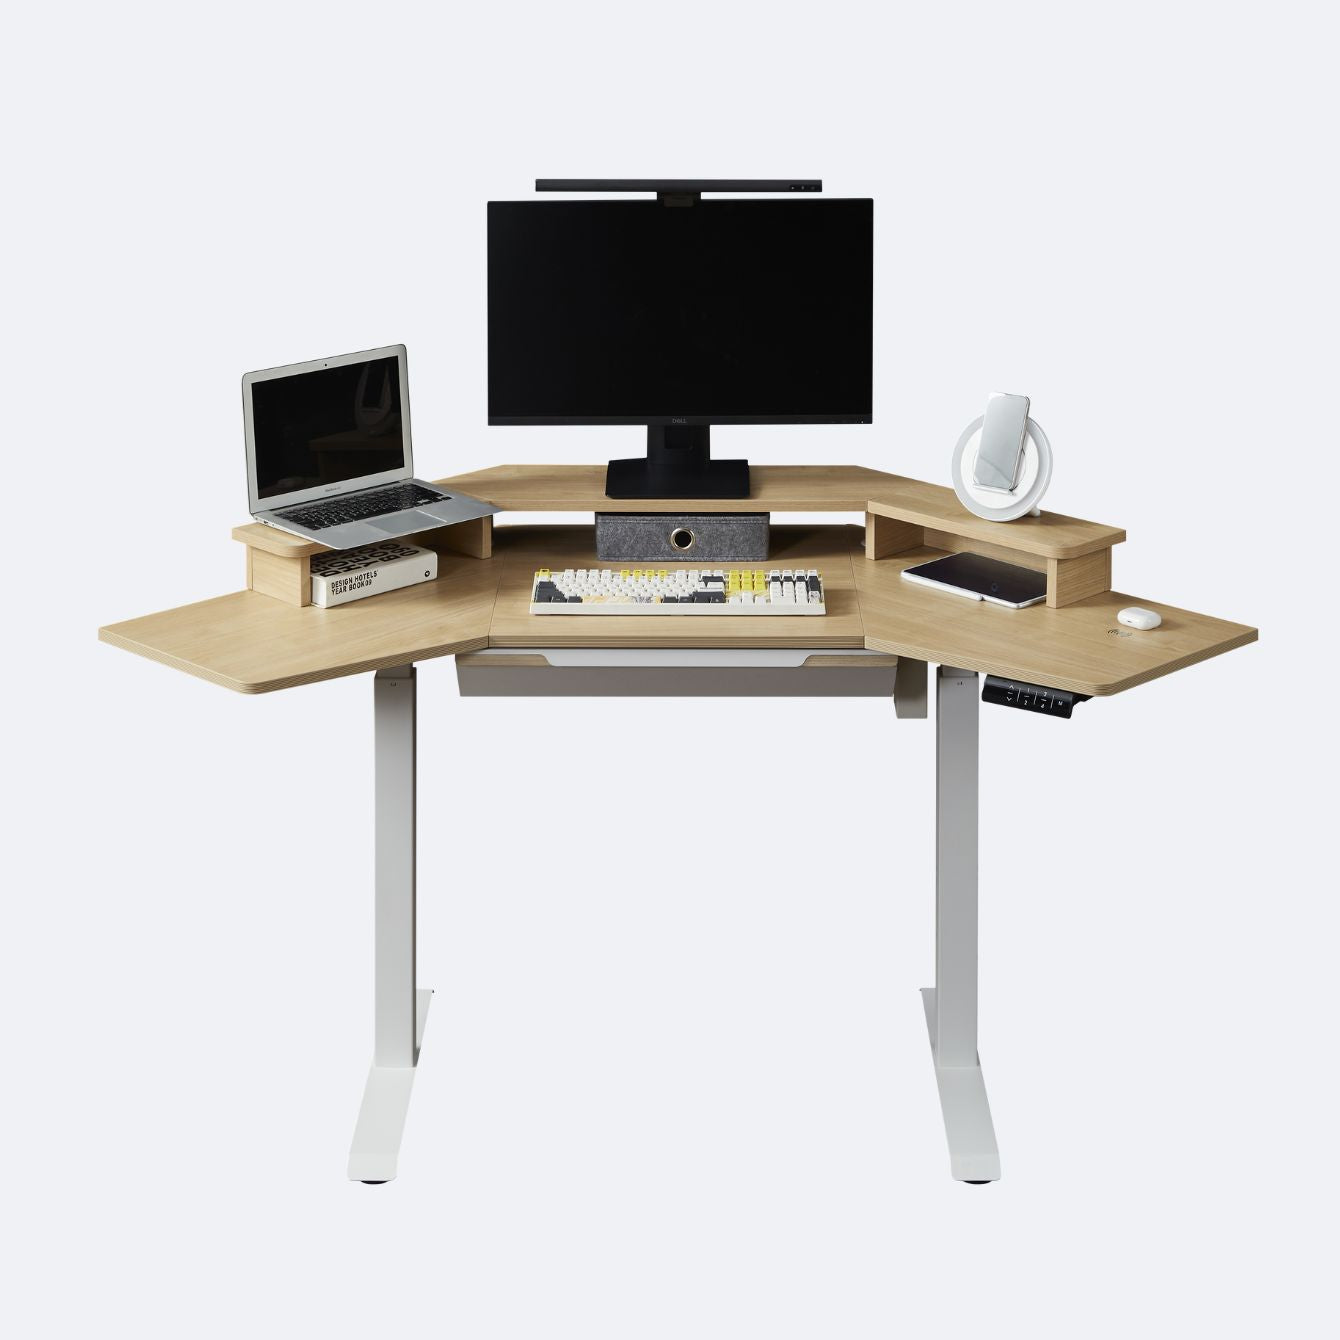 K3141 shoppable image for K3141 desk and the complement desk accessory set